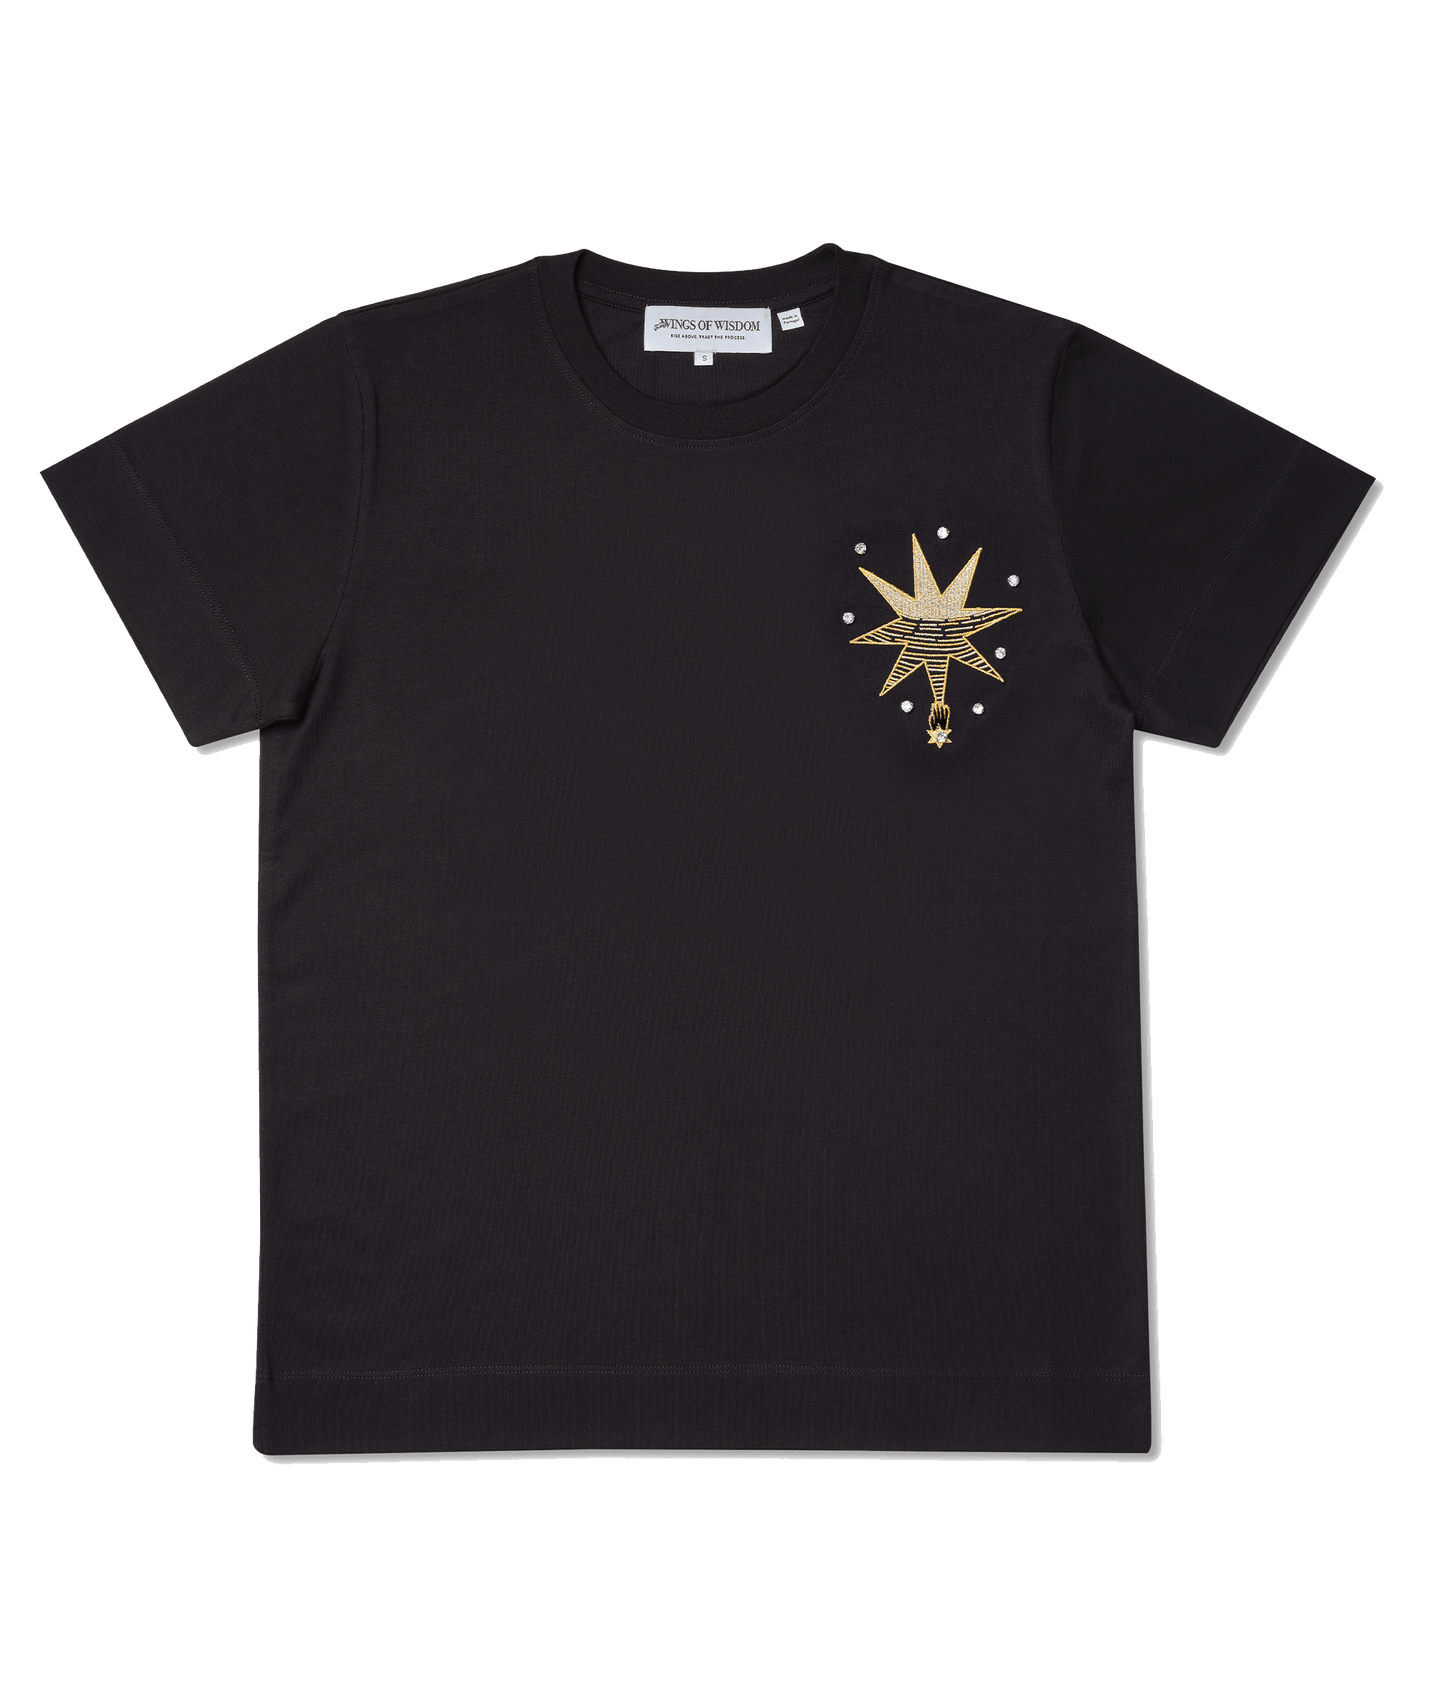 'Hand Me A Star' Black T-Shirt - Wing of Wisdom